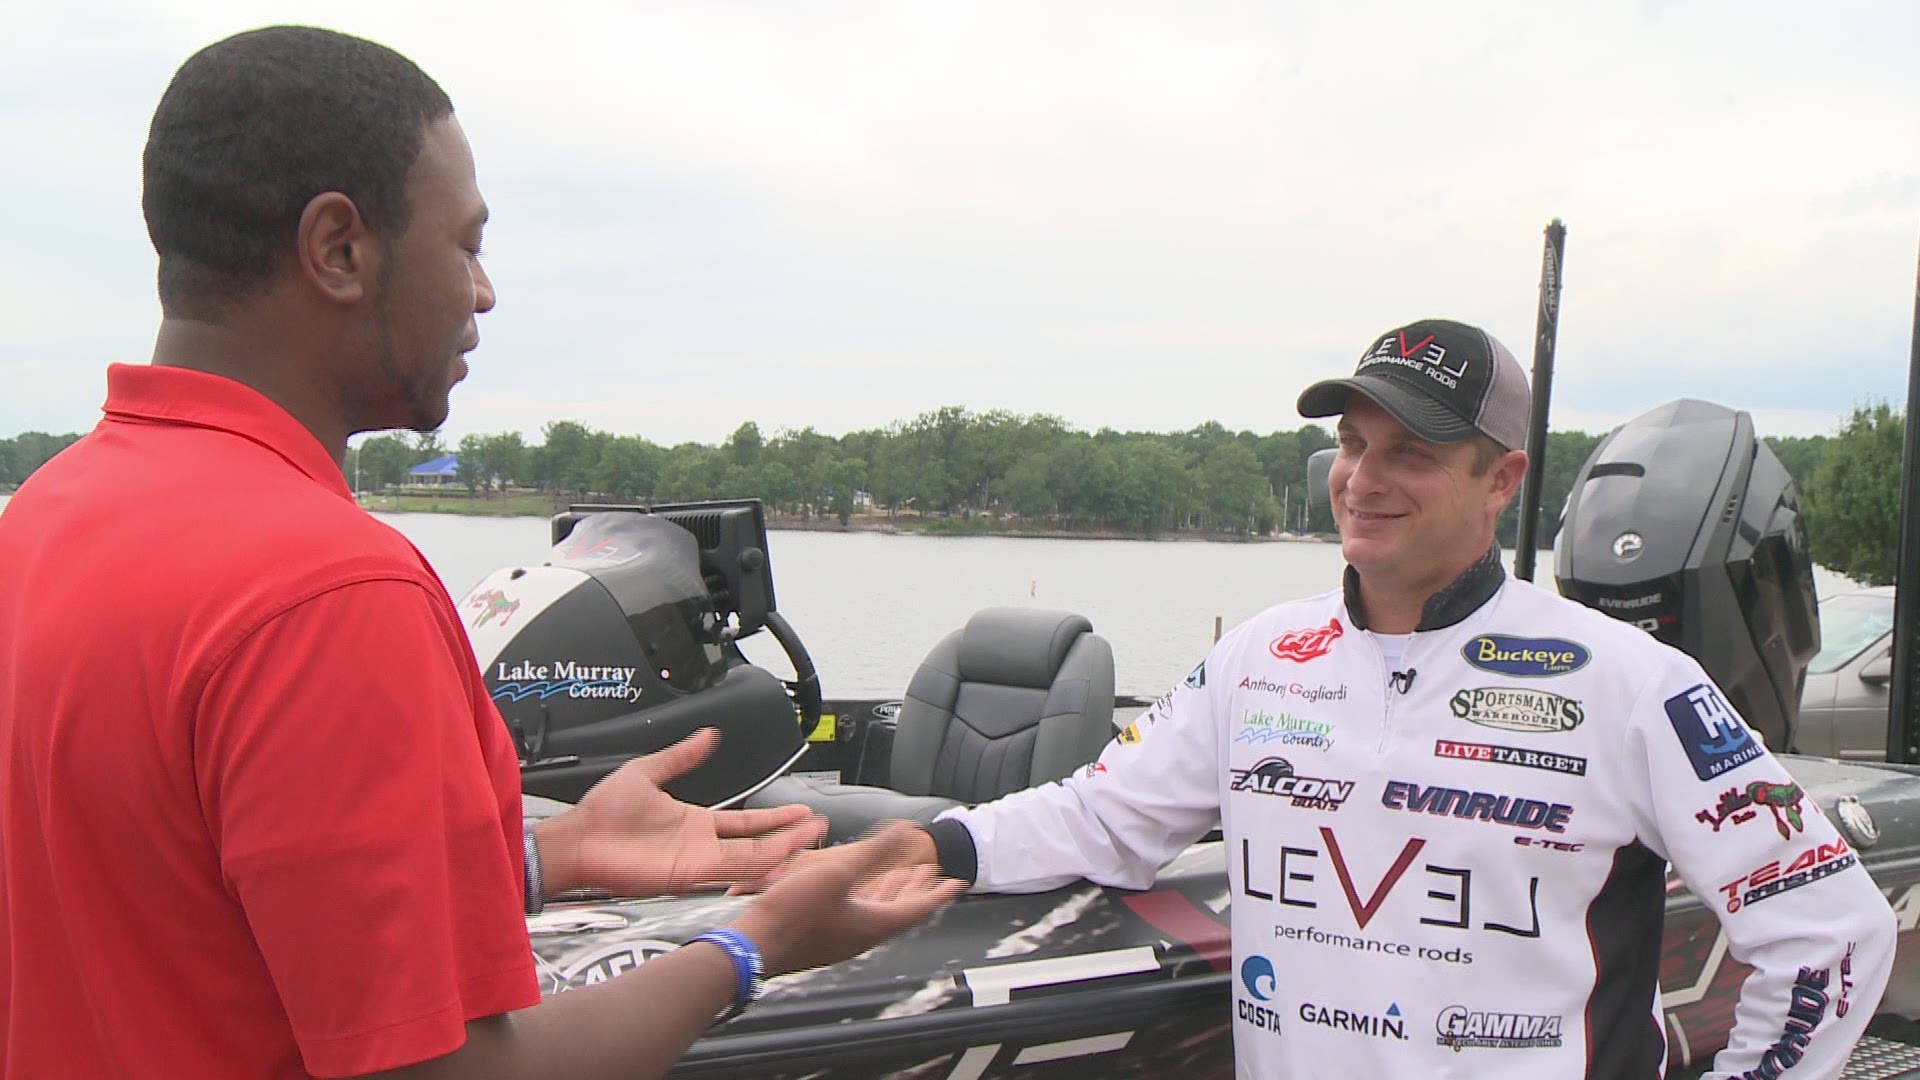 News 19 Sports Reporter Joe Cook learns the basic about fishing with local professional angler Anthony Gagliardi. He won the FLW Forrest Wood Cup tournament in 2014 and he'll be competing in this year's tournament on Lake Murray August 11-13.